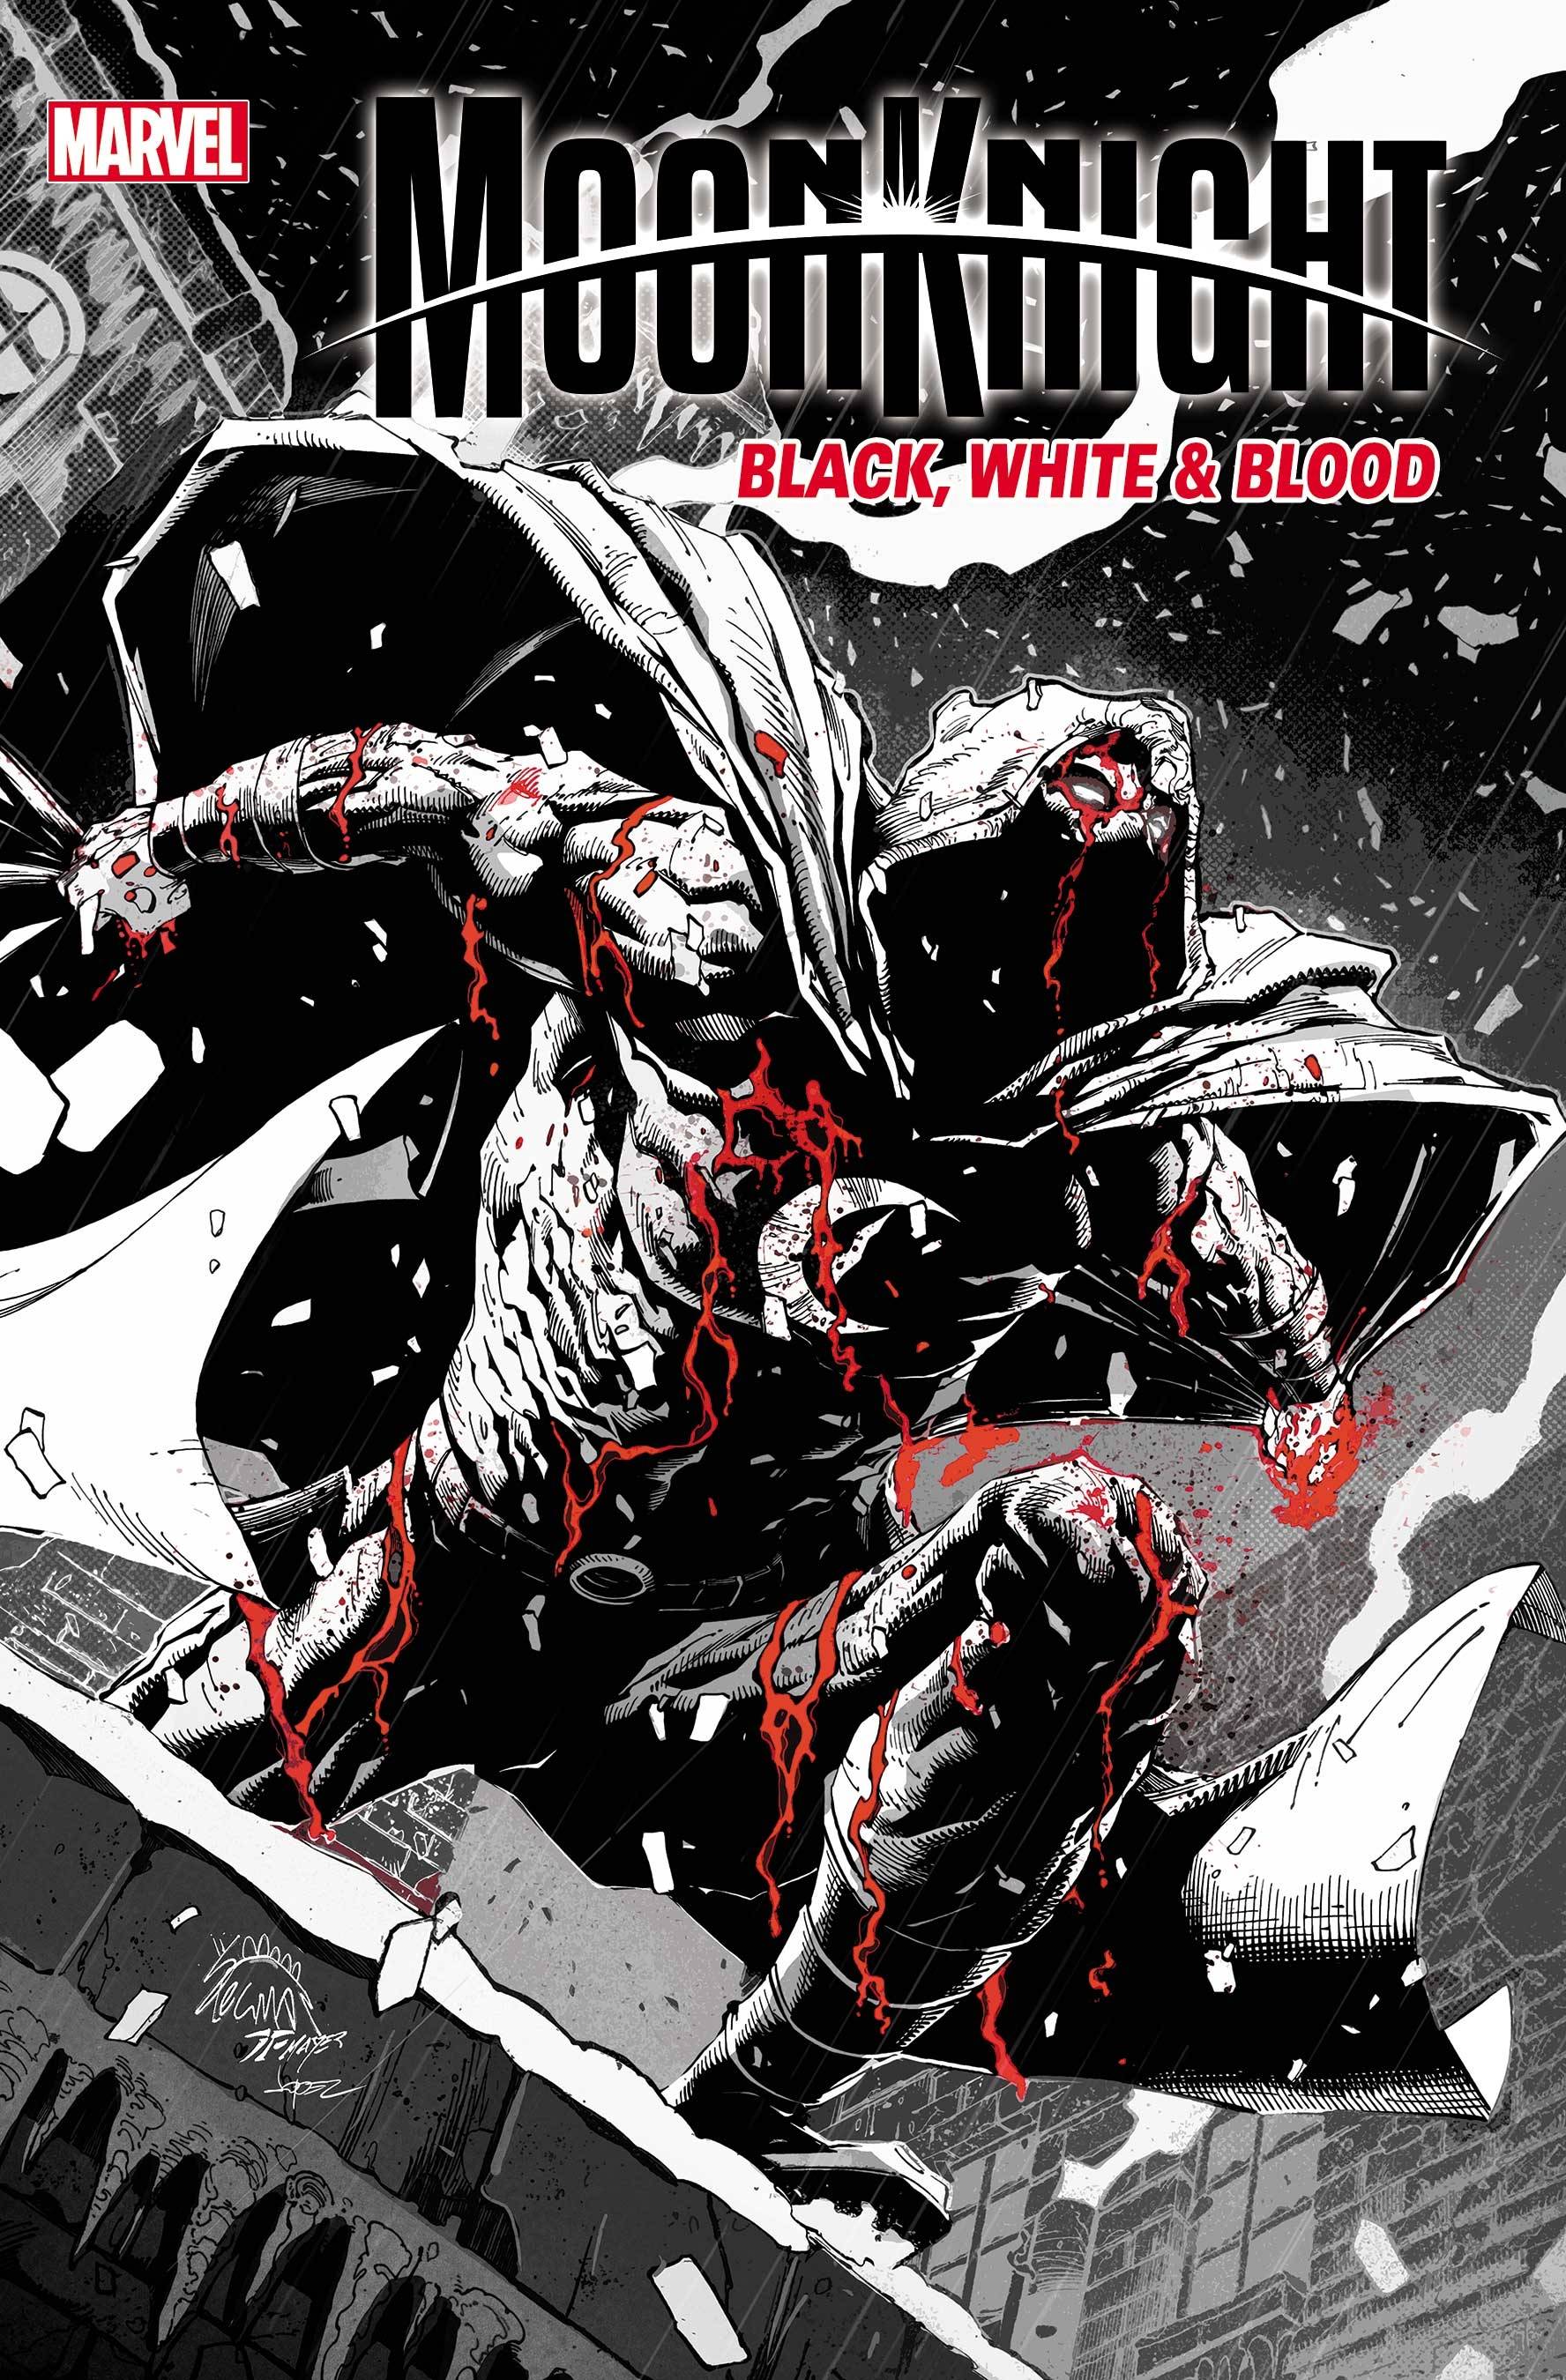 06/15/2022 MOON KNIGHT BLACK WHITE BLOOD #2 (OF 4)